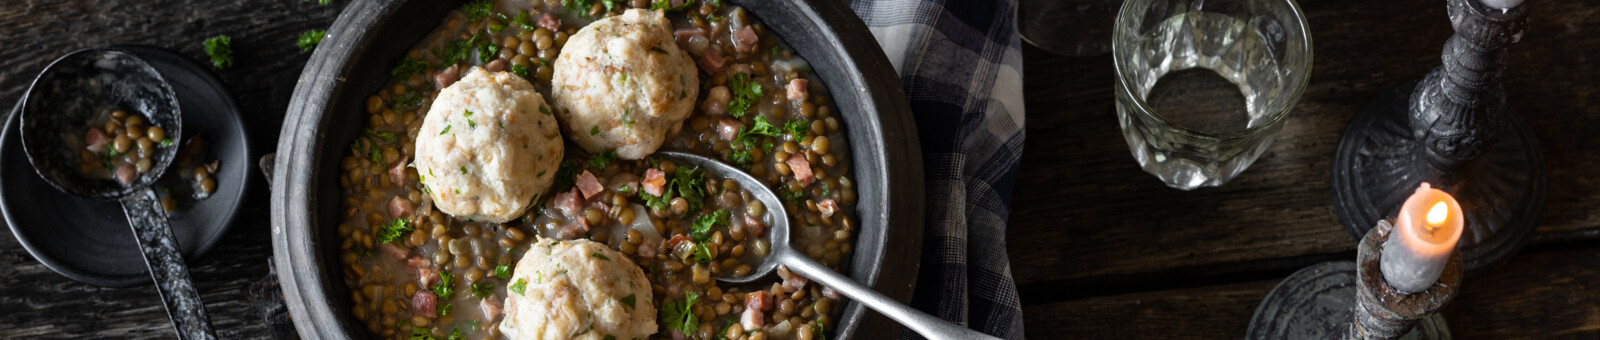     Lentil stew with bacon and bread dumplings 